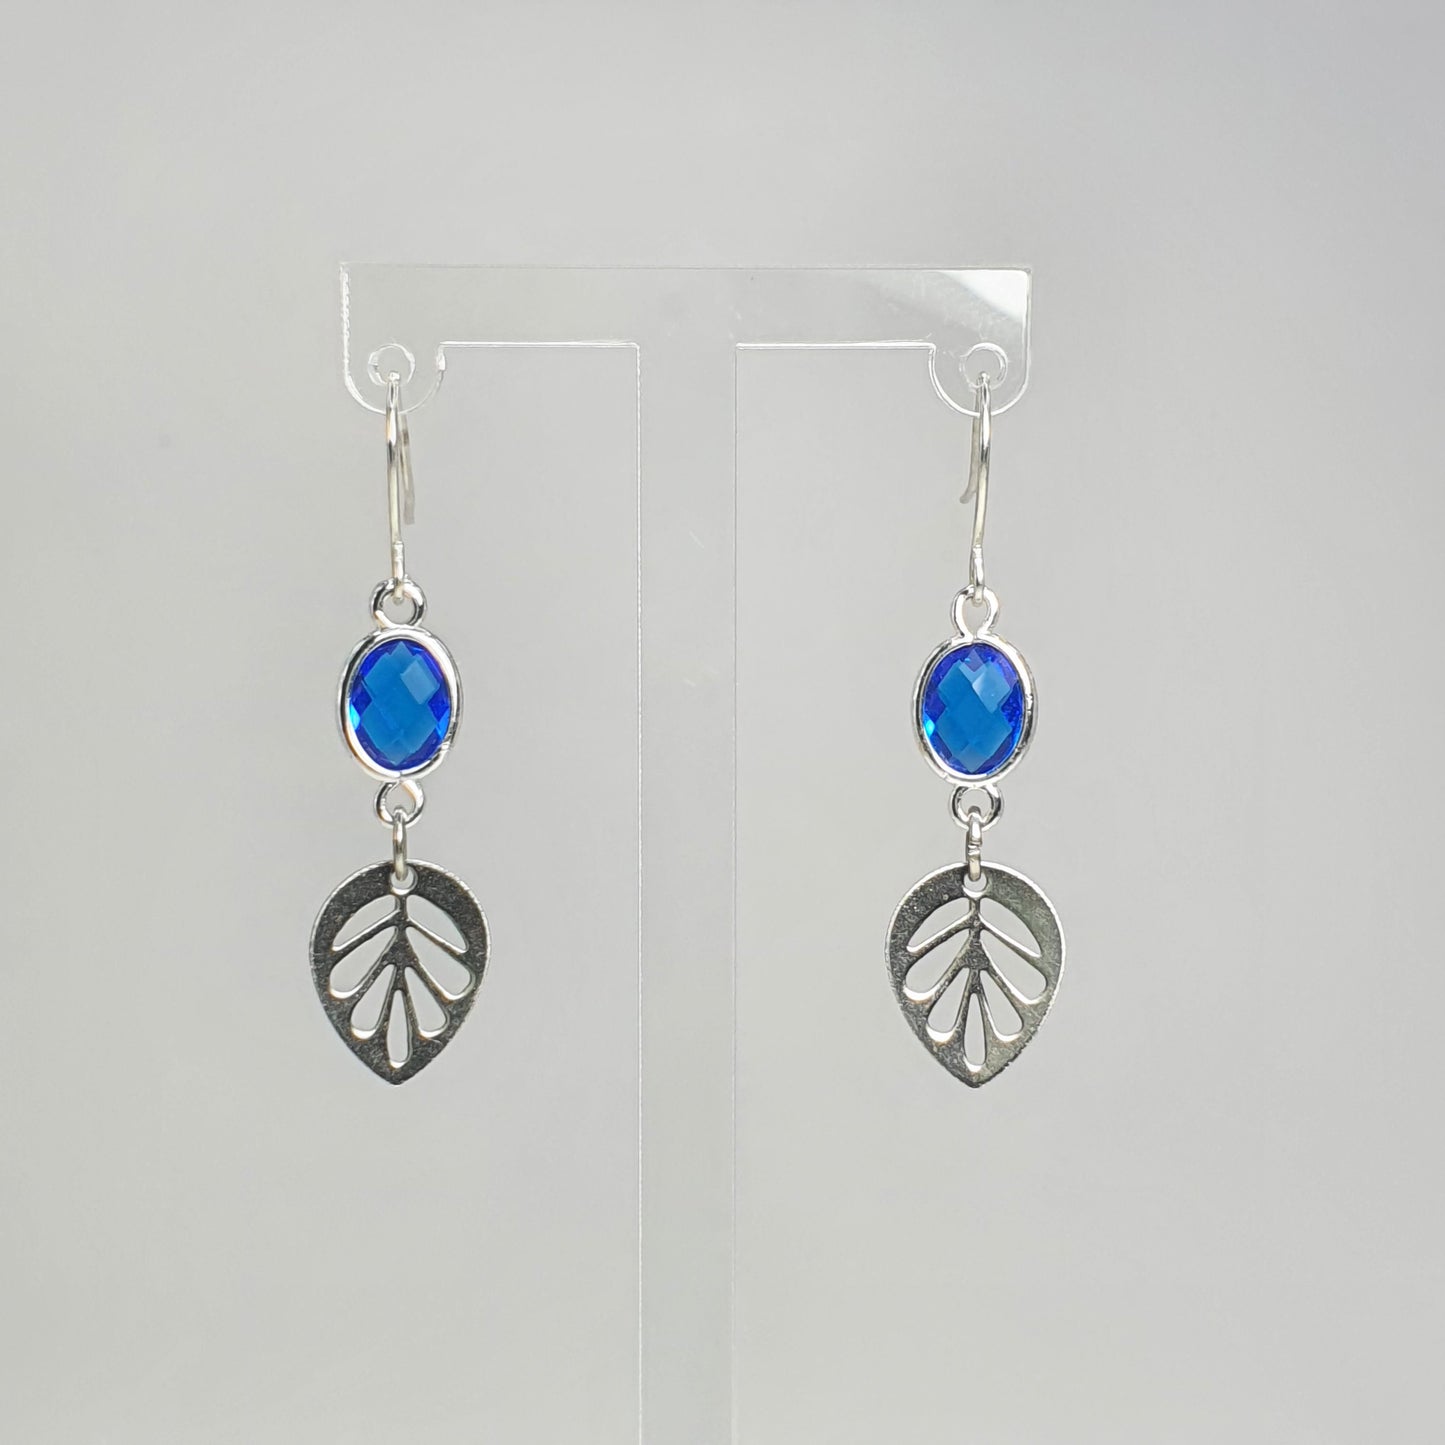 Colourful glass silver leaf earrings | Fashion earrings | Birthday Gifts, Anniversary Gifts, Valentine's Day, Christmas, Easter, Eid, Mother's Day, Diwali, Hannukah, Women's, Girl's, Gifts for her, Gifts for Girlfriend, Gifts for Mom, Gifts for Mum, Gifts for Friend, Handmade Gifts, Handmade Jewelry, New Year's Eve, Graduation, Boho, Hippie, Minimalist, Gemstone, Crystal, Crystal Healing